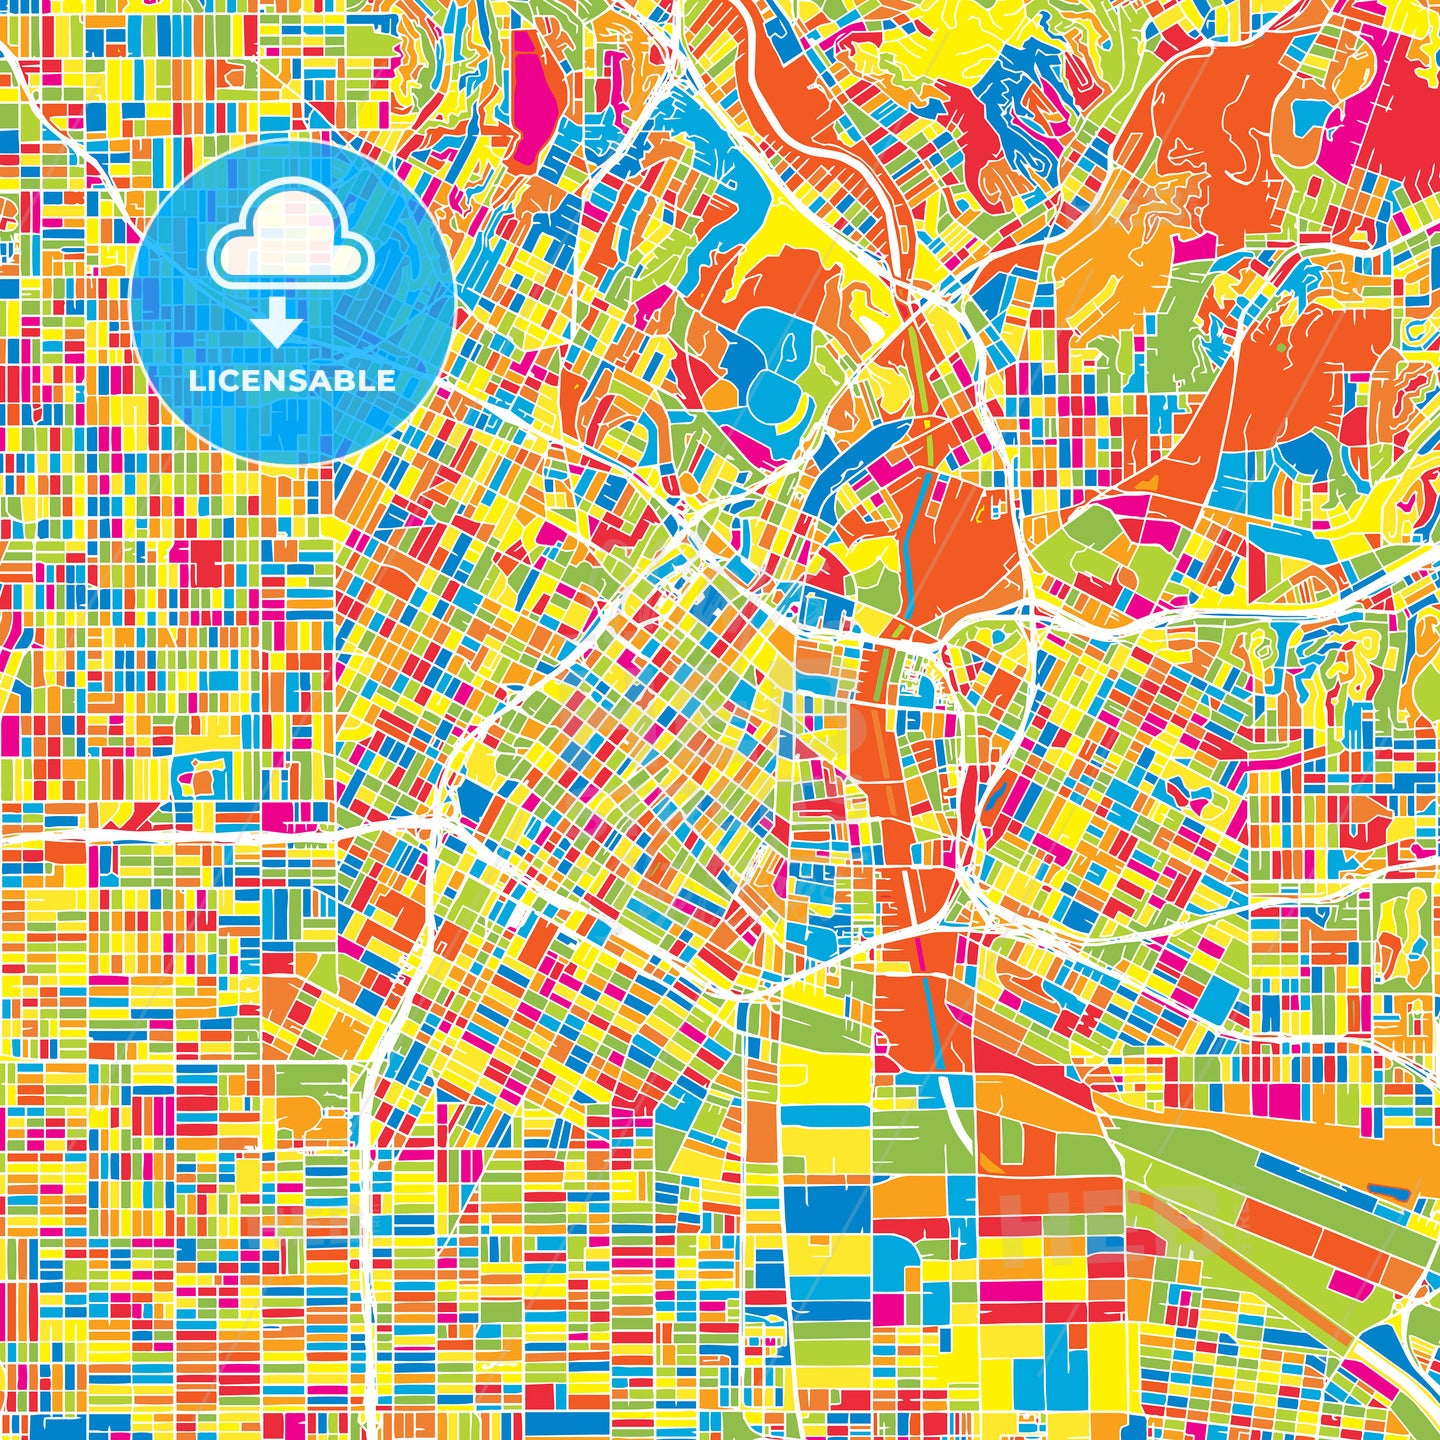 Los Angeles, United States, colorful vector map